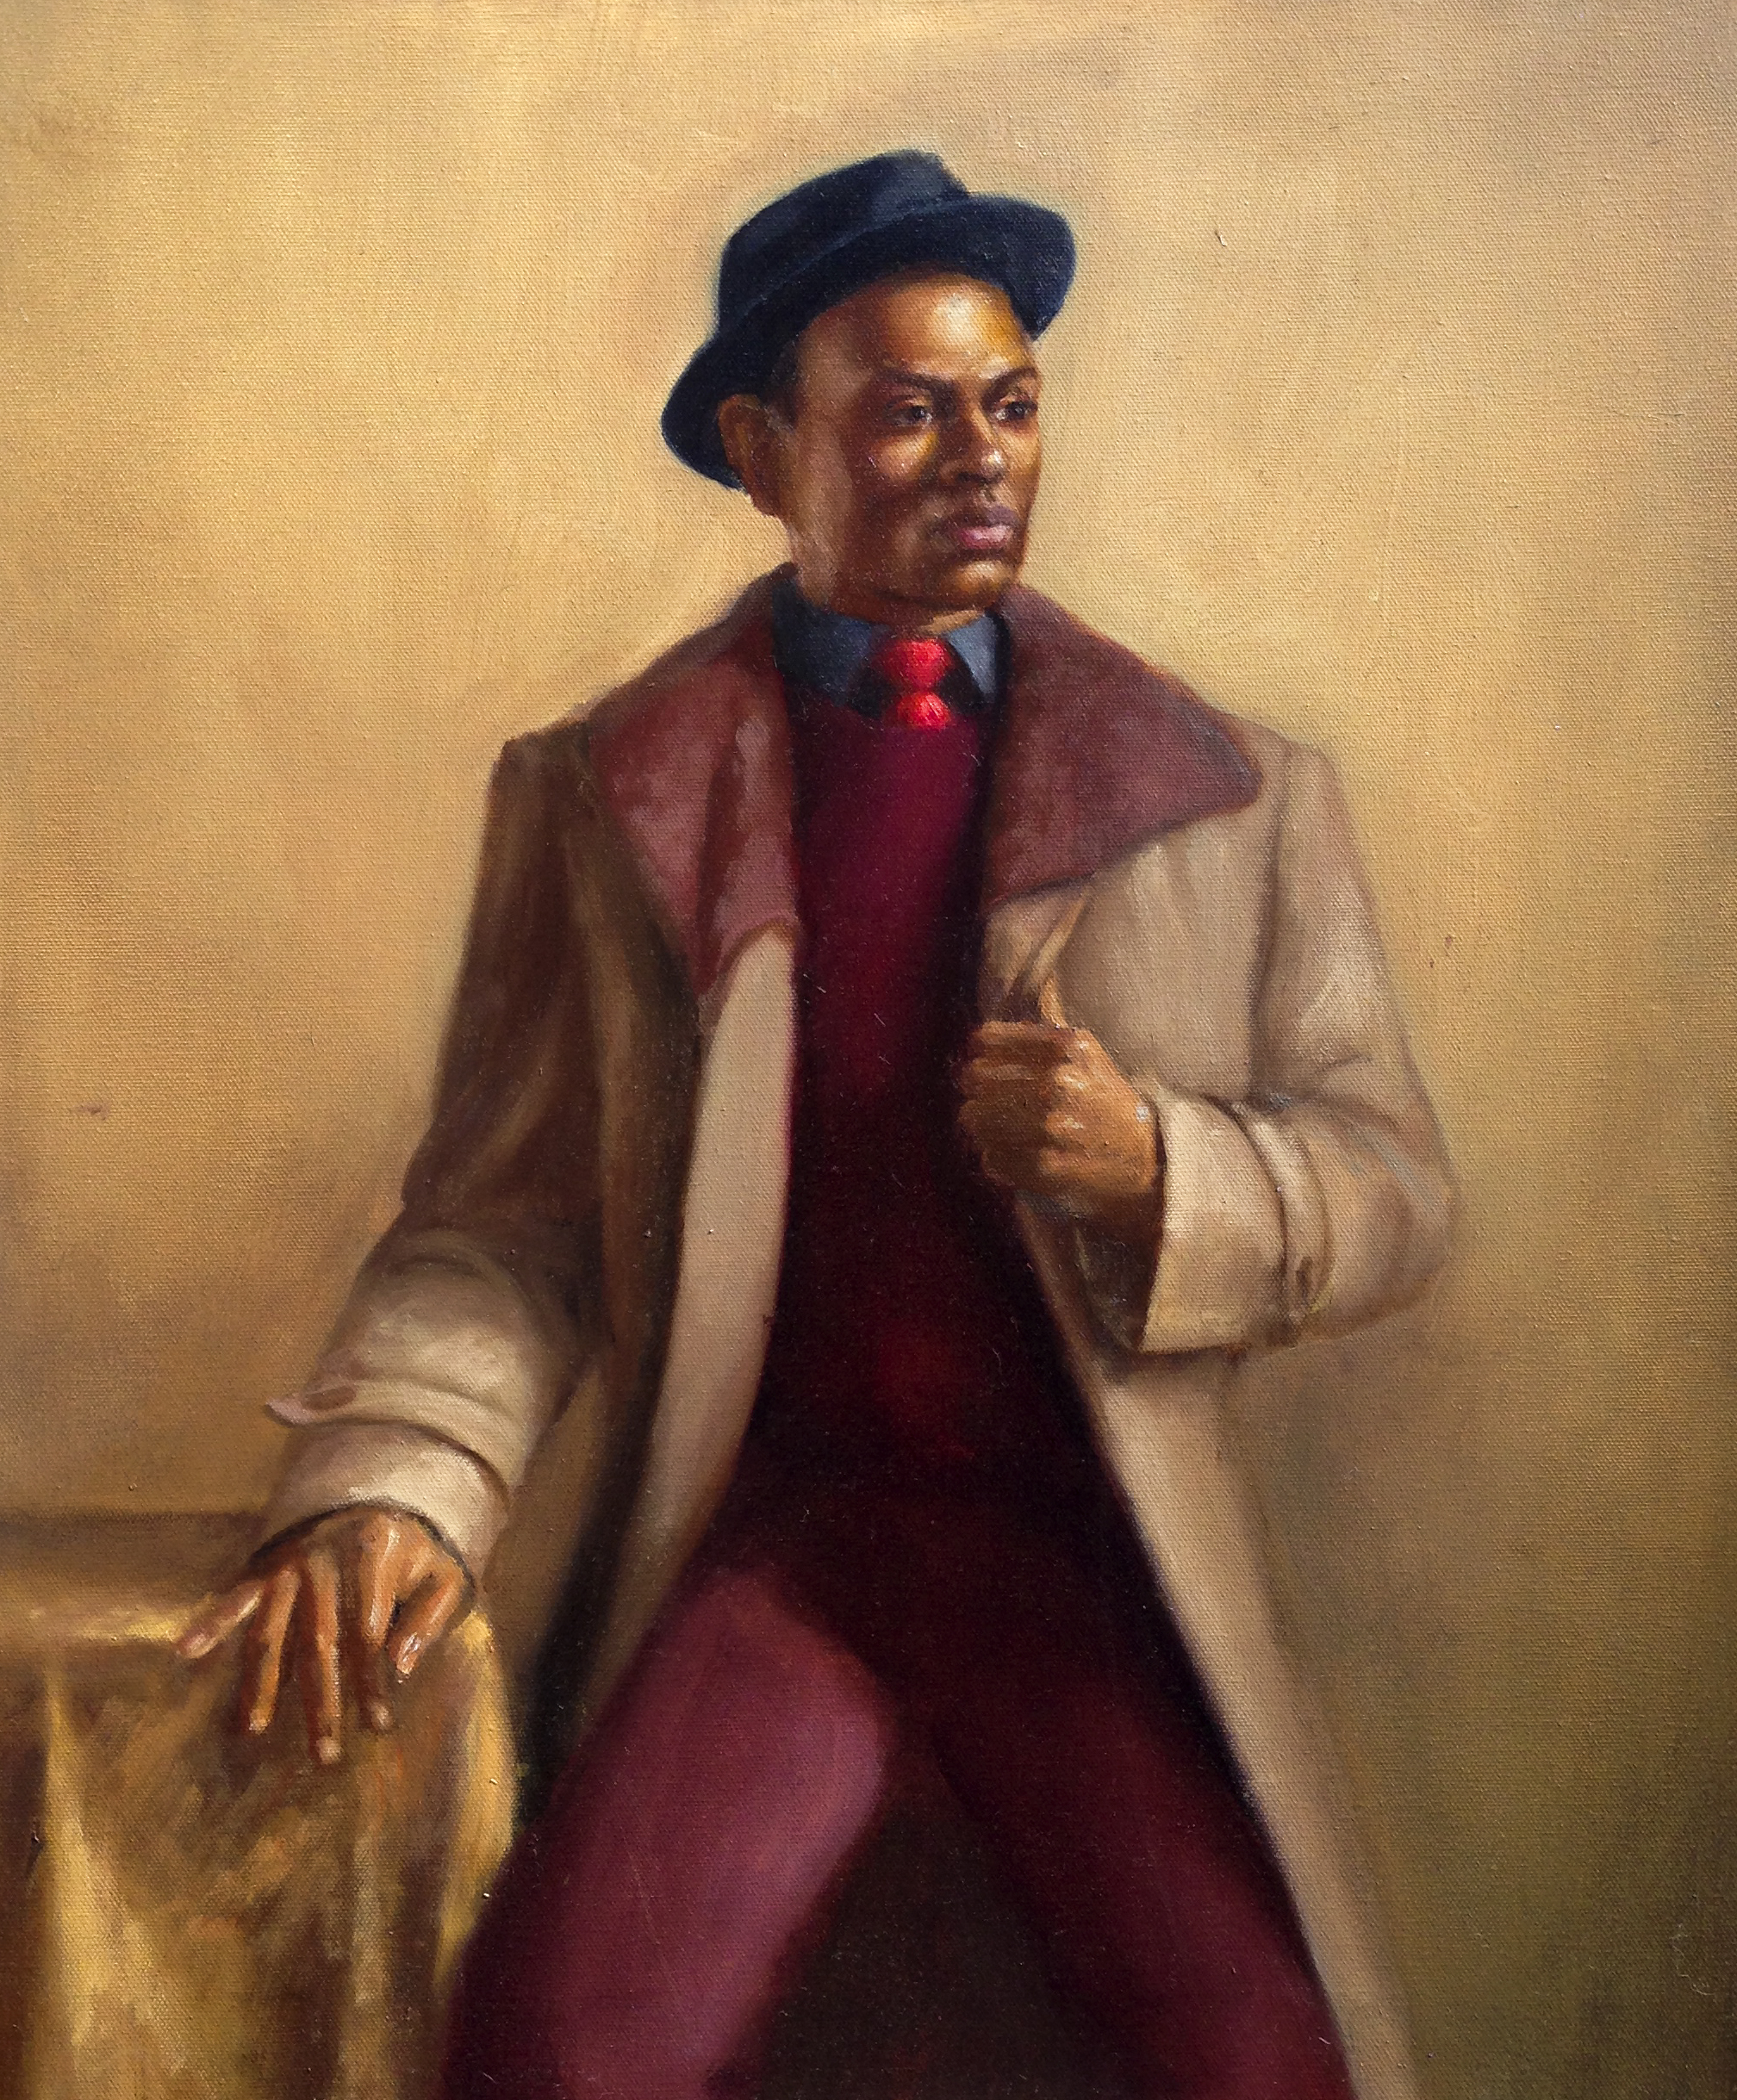 Man in the Coat 20x24 Oil on canvas 